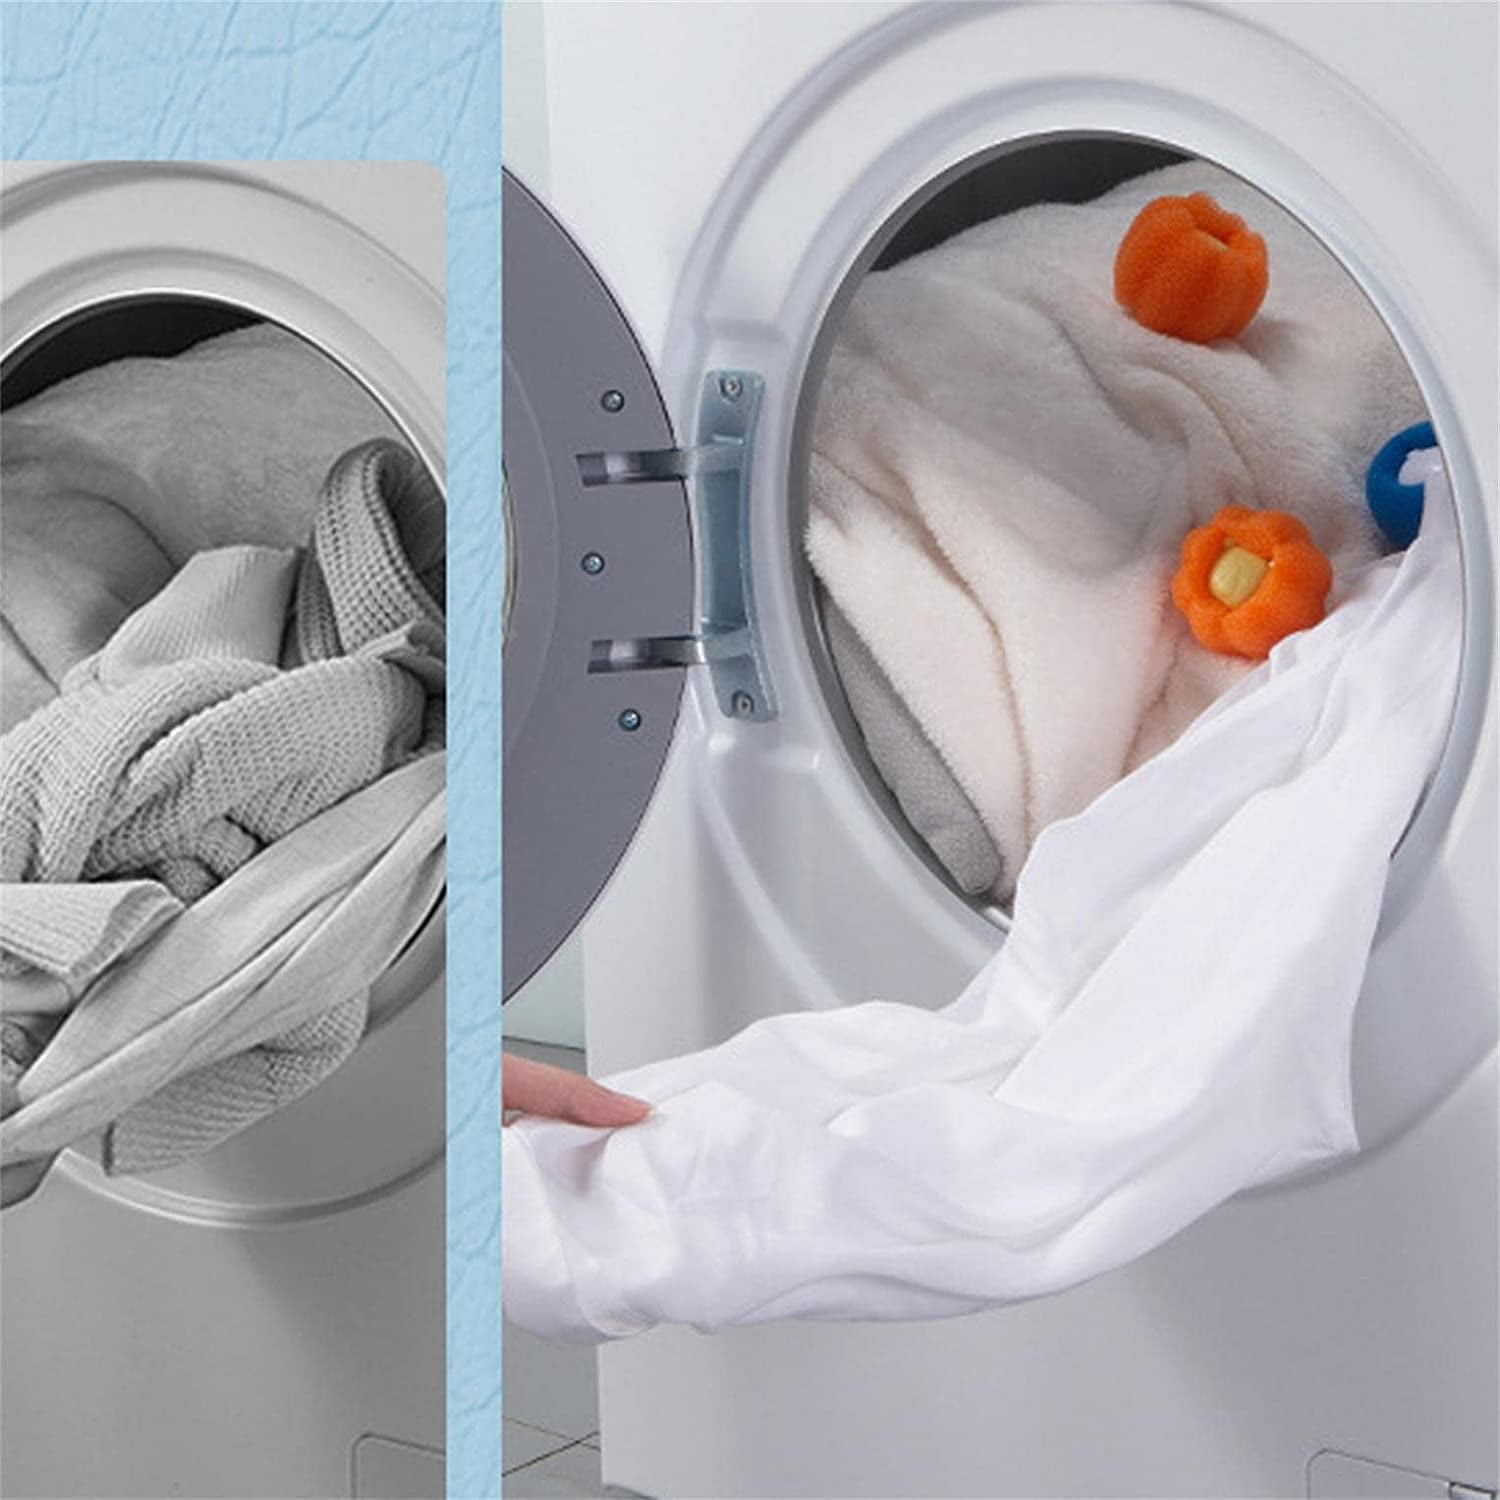 1pc Washing Machine Hair Catcher Filter Bag, Experience Kit For Laundry Lint  Remover, Bra & Underwear Protector